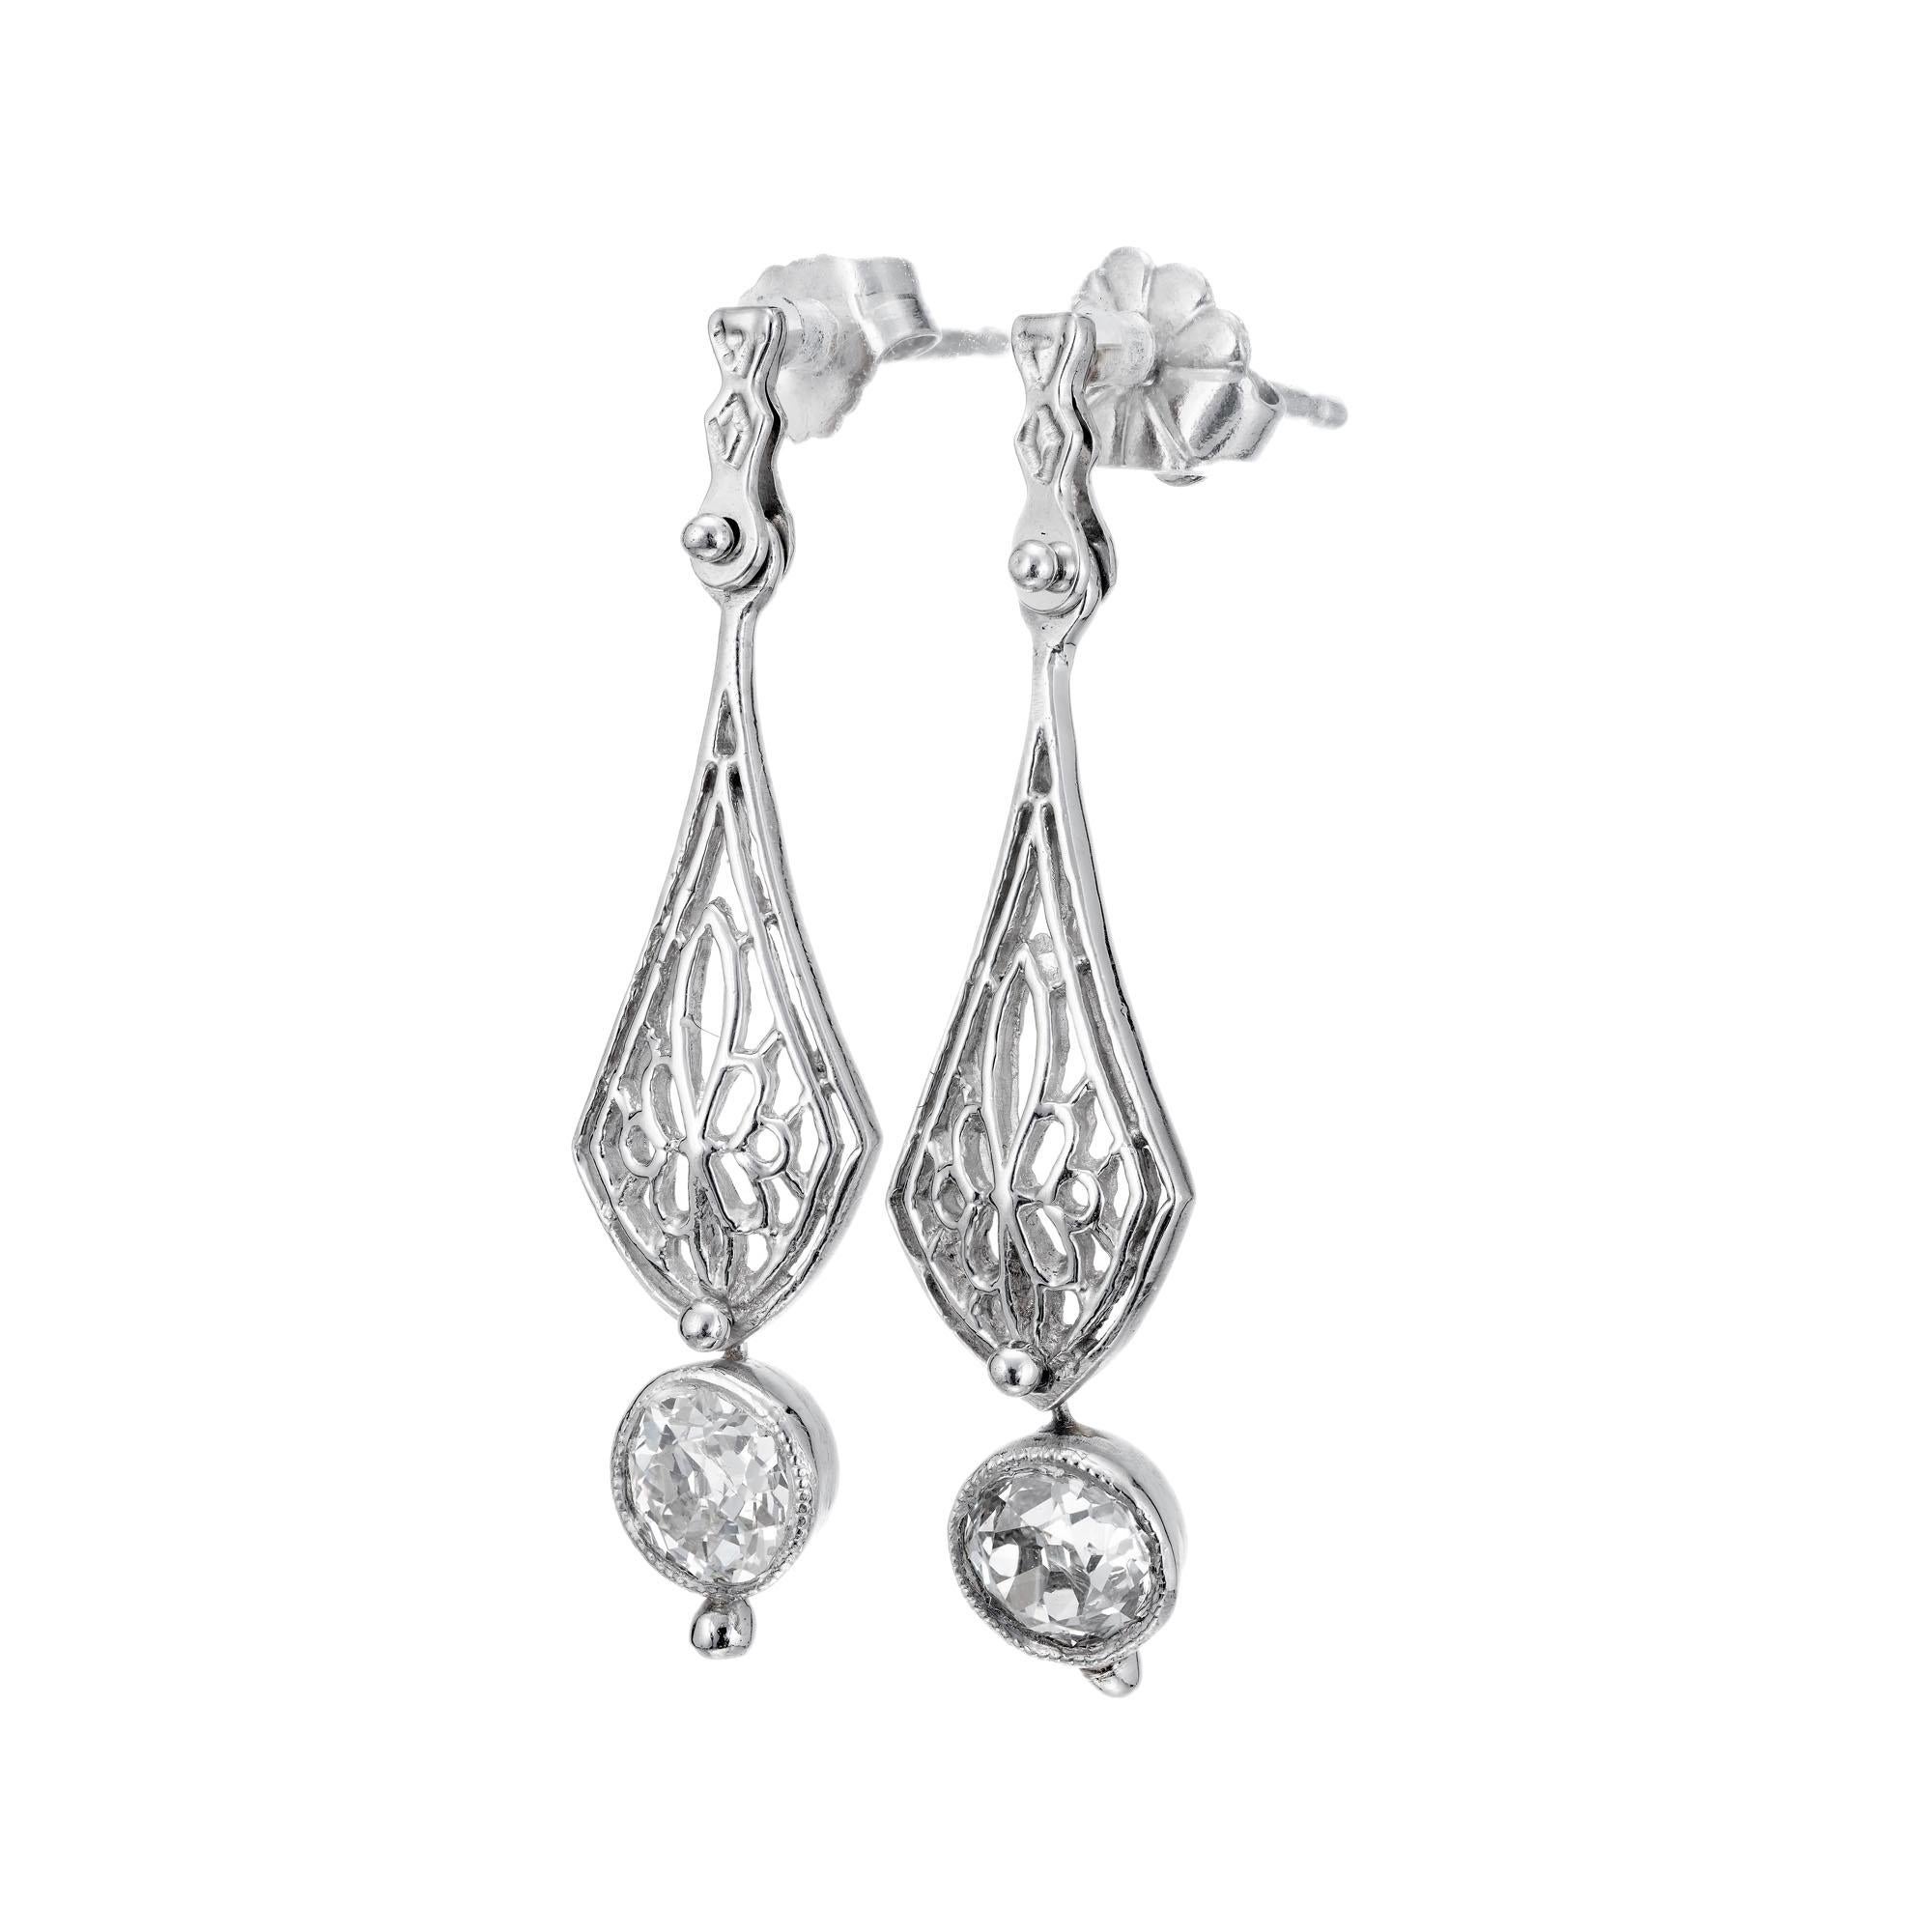 Edwardian style Platinum Art Deco handmade 1910-1920 diamond dangle earrings.  Tow old European cut diamonds dangle at the bottom center section.  Moves side to side on a rivet from the top section.  

2 old mine cut diamonds   approx.   total